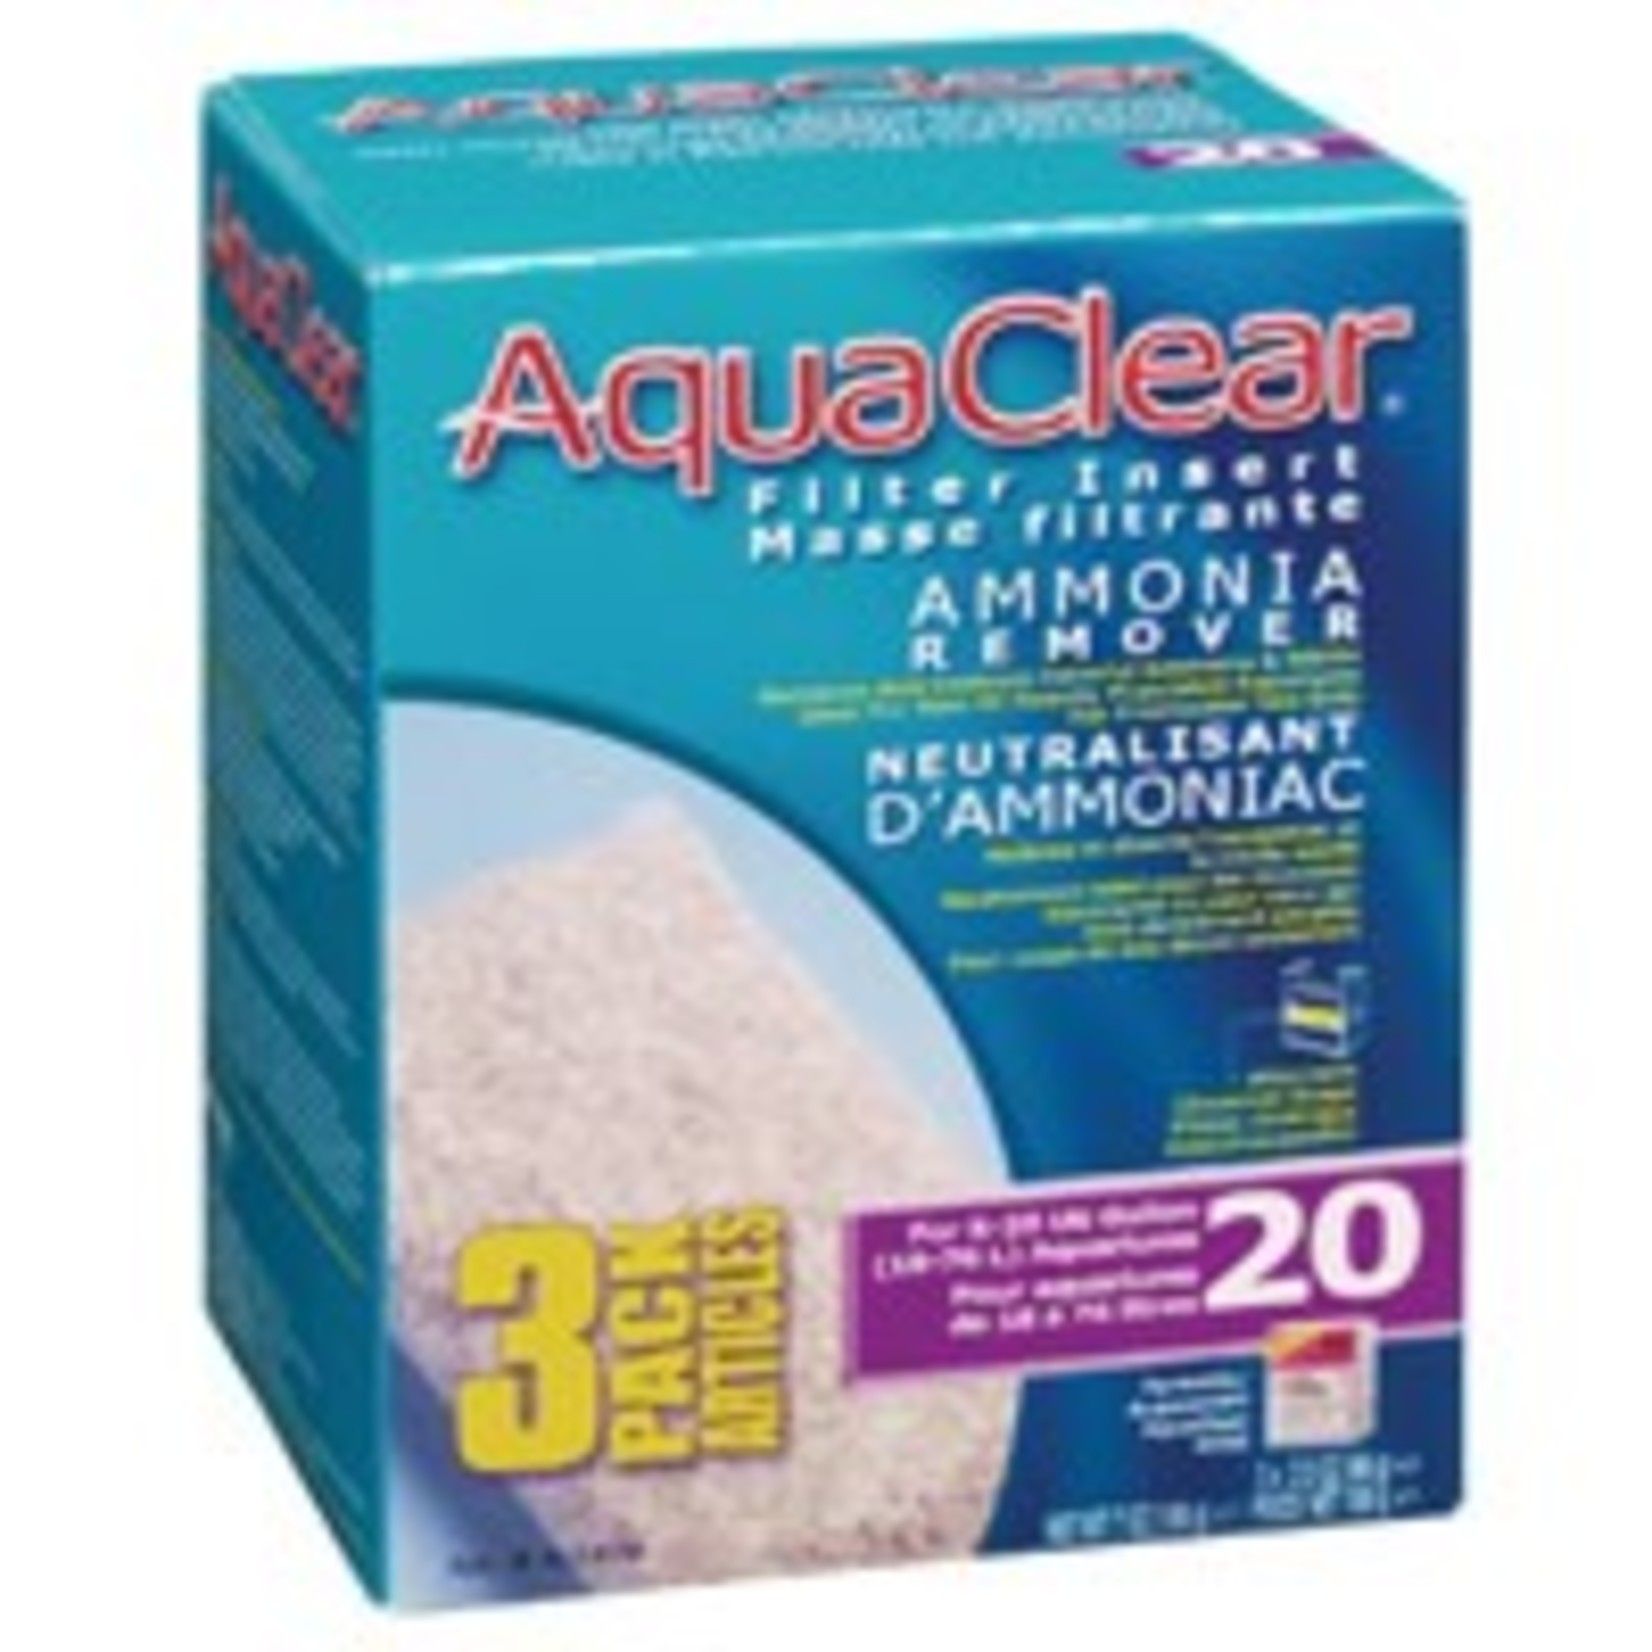 AquaClear 20 Ammonia Remover Filter Insert 3 pack, 198 g (7 oz)